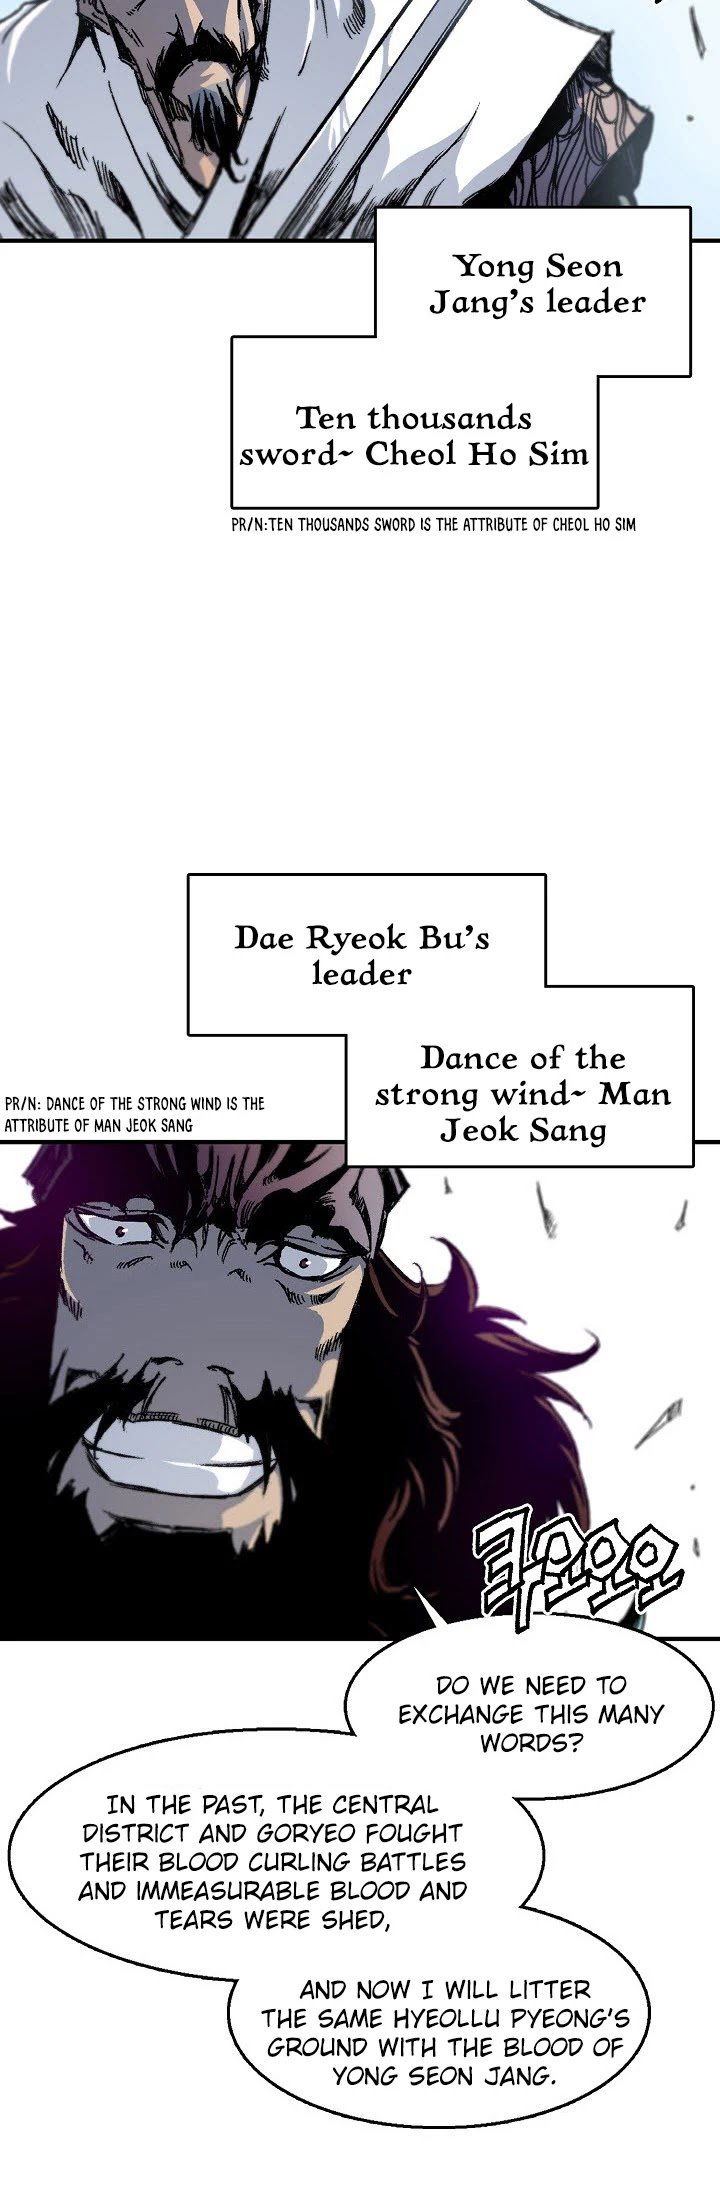 Memoir Of The King Of War Chapter 1 page 9